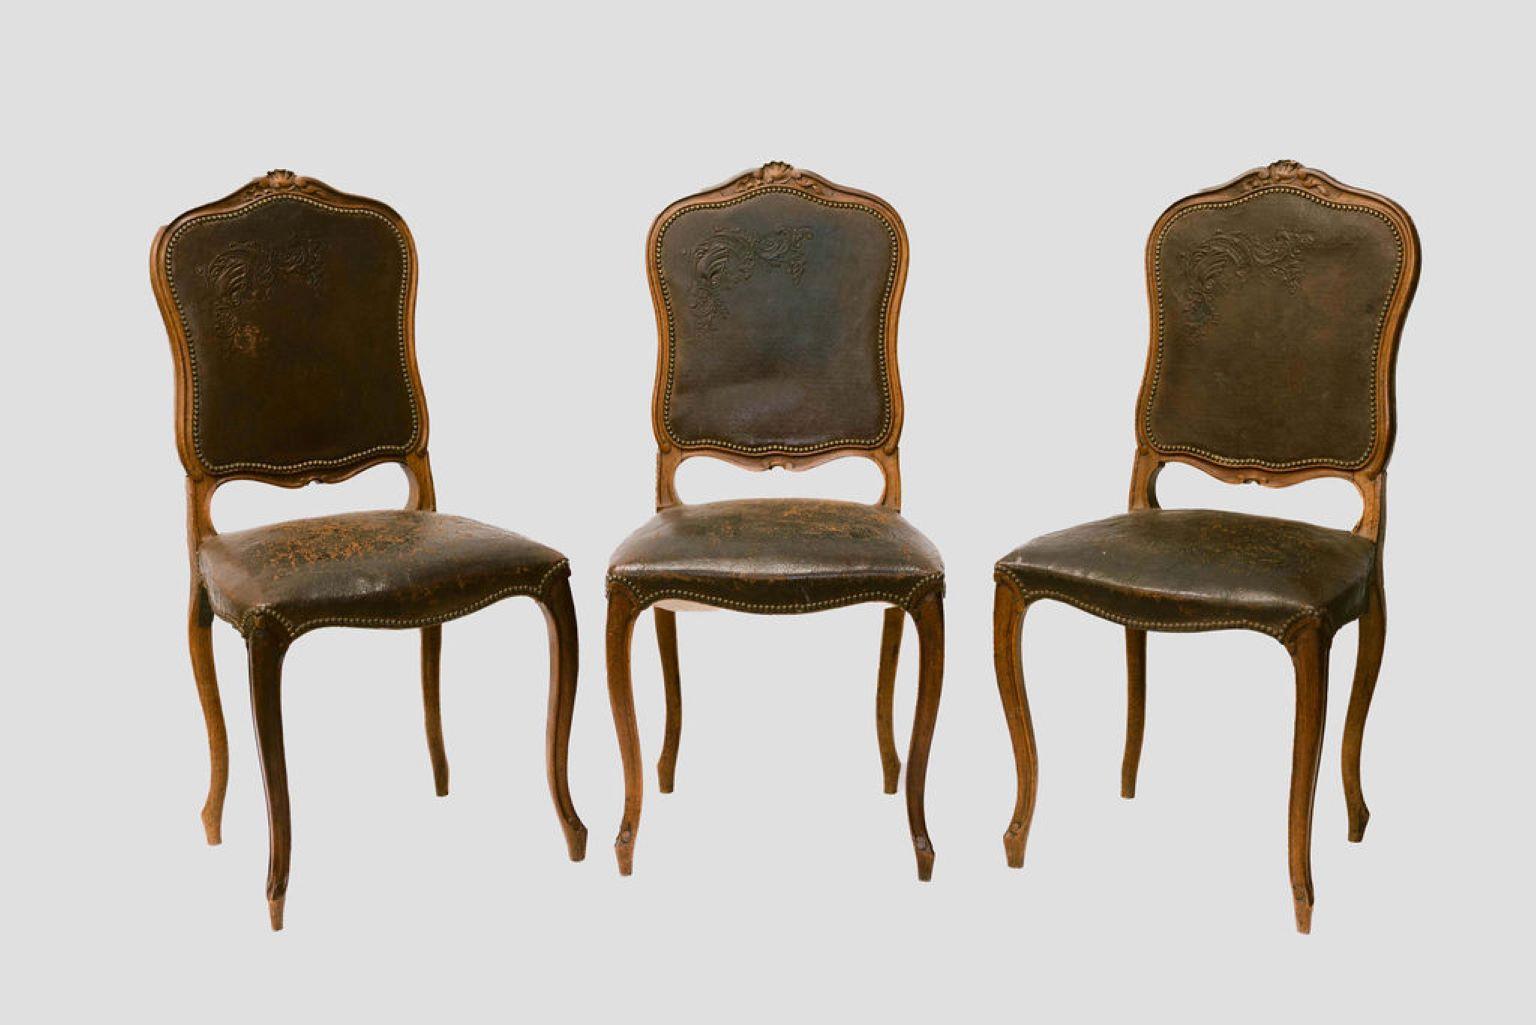 Carved walnut, Louis XV french style, dining chairs with cabriole legs, tacked, embossed leather, and a carved shell crest.